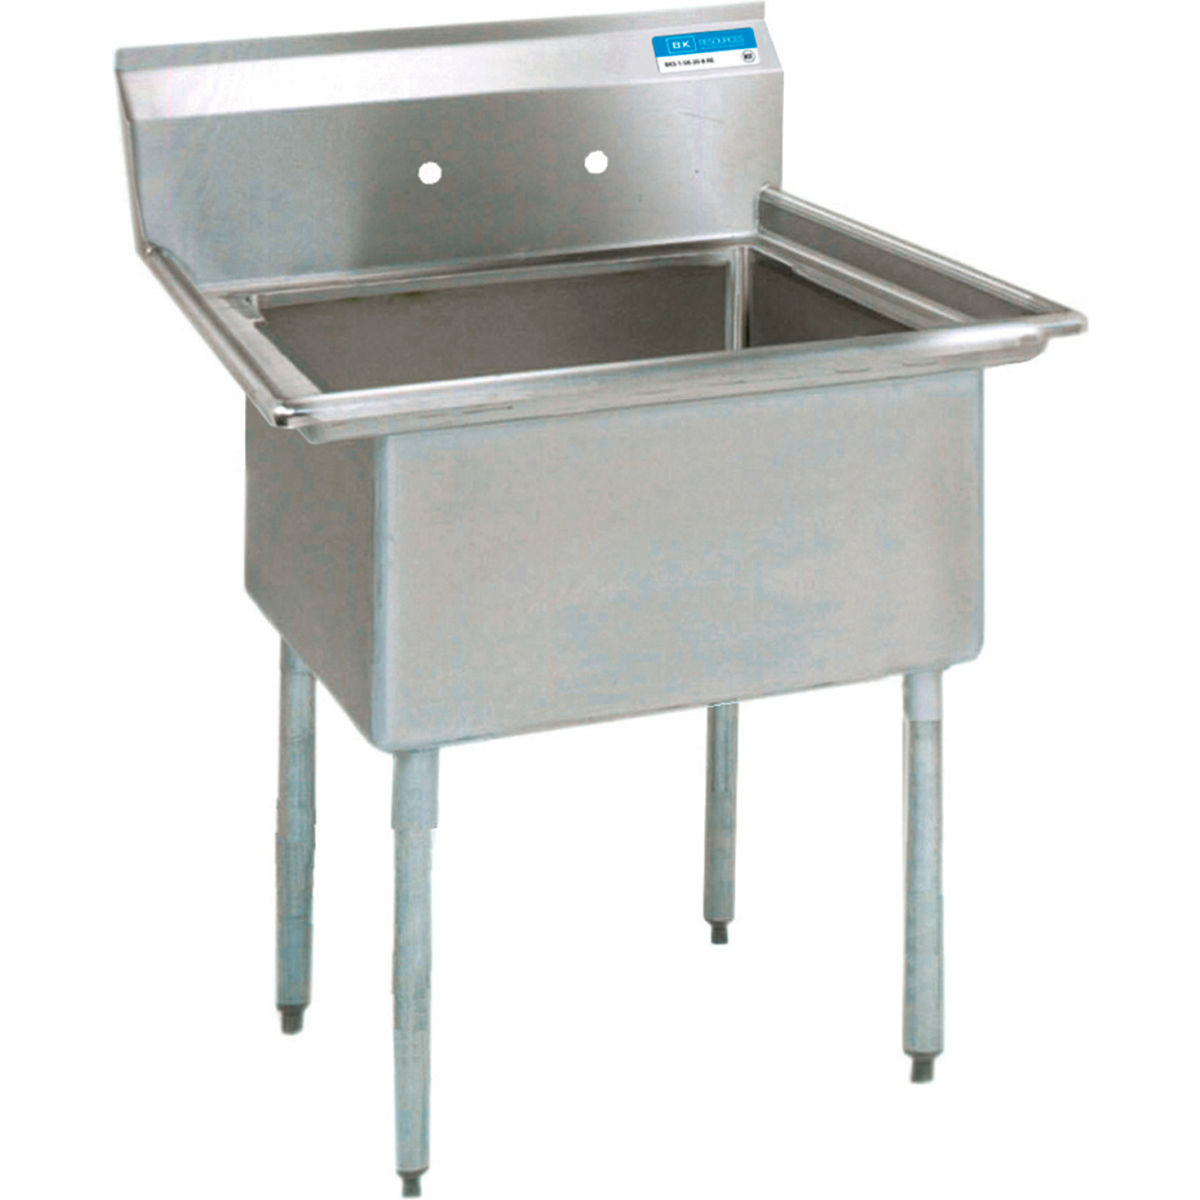 Picture of BK Resources B2260808 1-Compartment Sink with Galvanized Legs - 24 x 24 x 14 in.